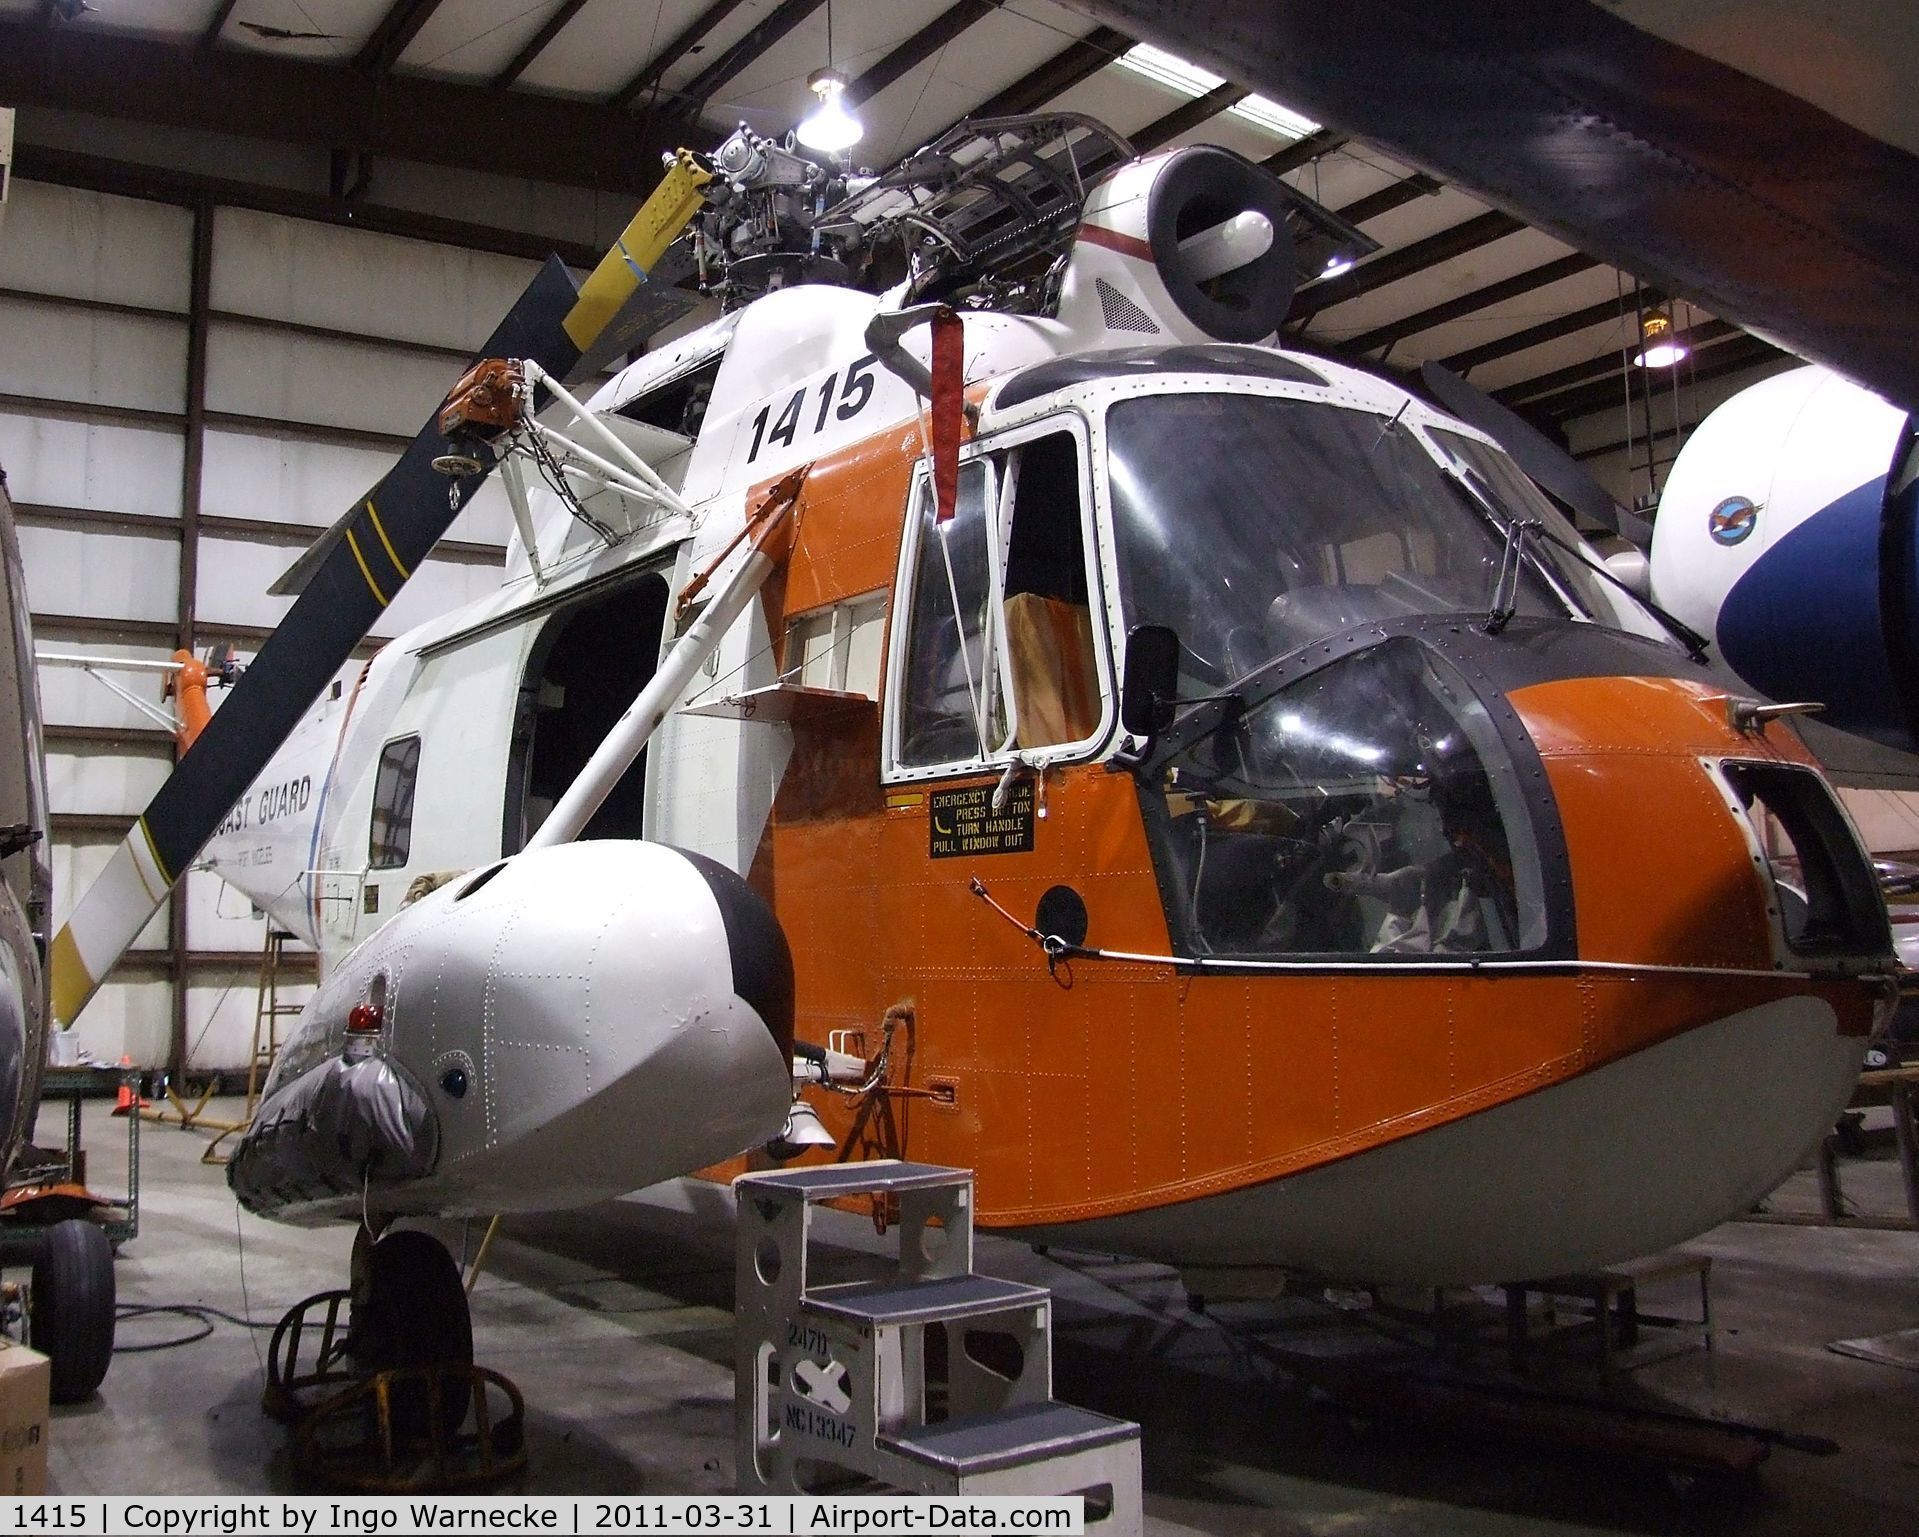 1415, Sikorsky HH-52A Sea Guard C/N 62.099, Sikorsky HH-52A Sea Guardian at the Museum of Flight Restoration Center, Everett WA